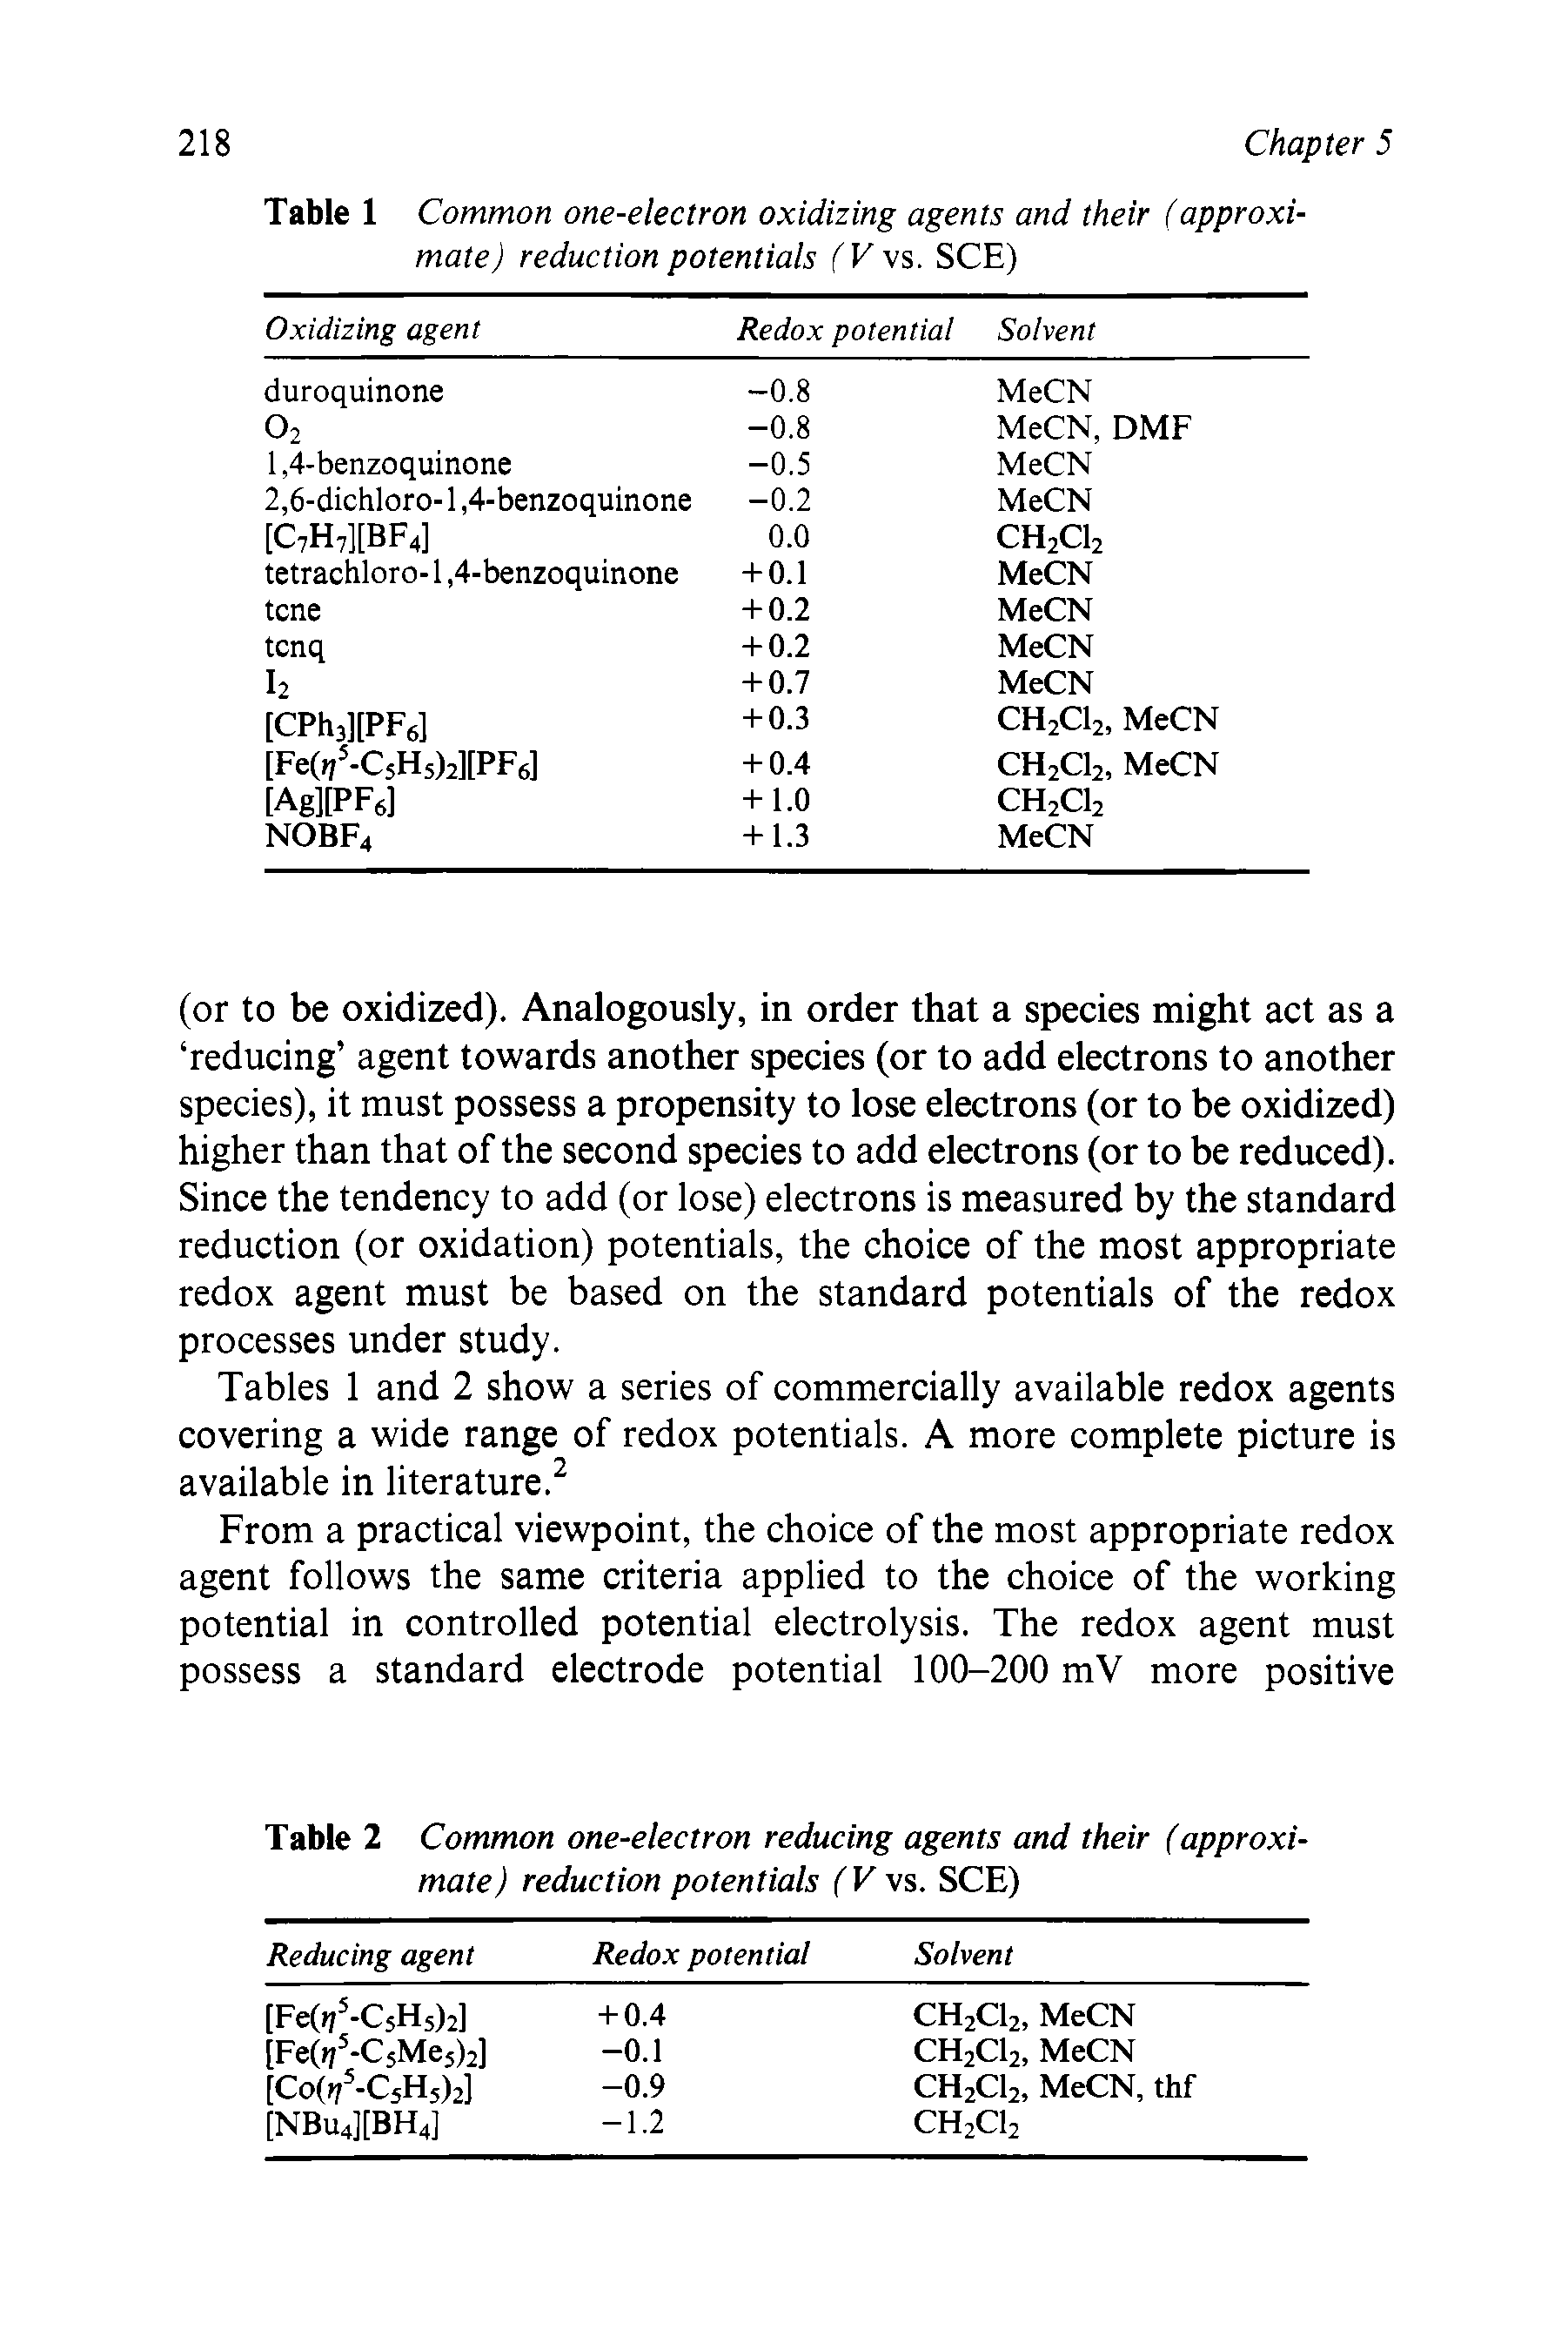 Tables 1 and 2 show a series of commercially available redox agents covering a wide range of redox potentials. A more complete picture is available in literature.2...